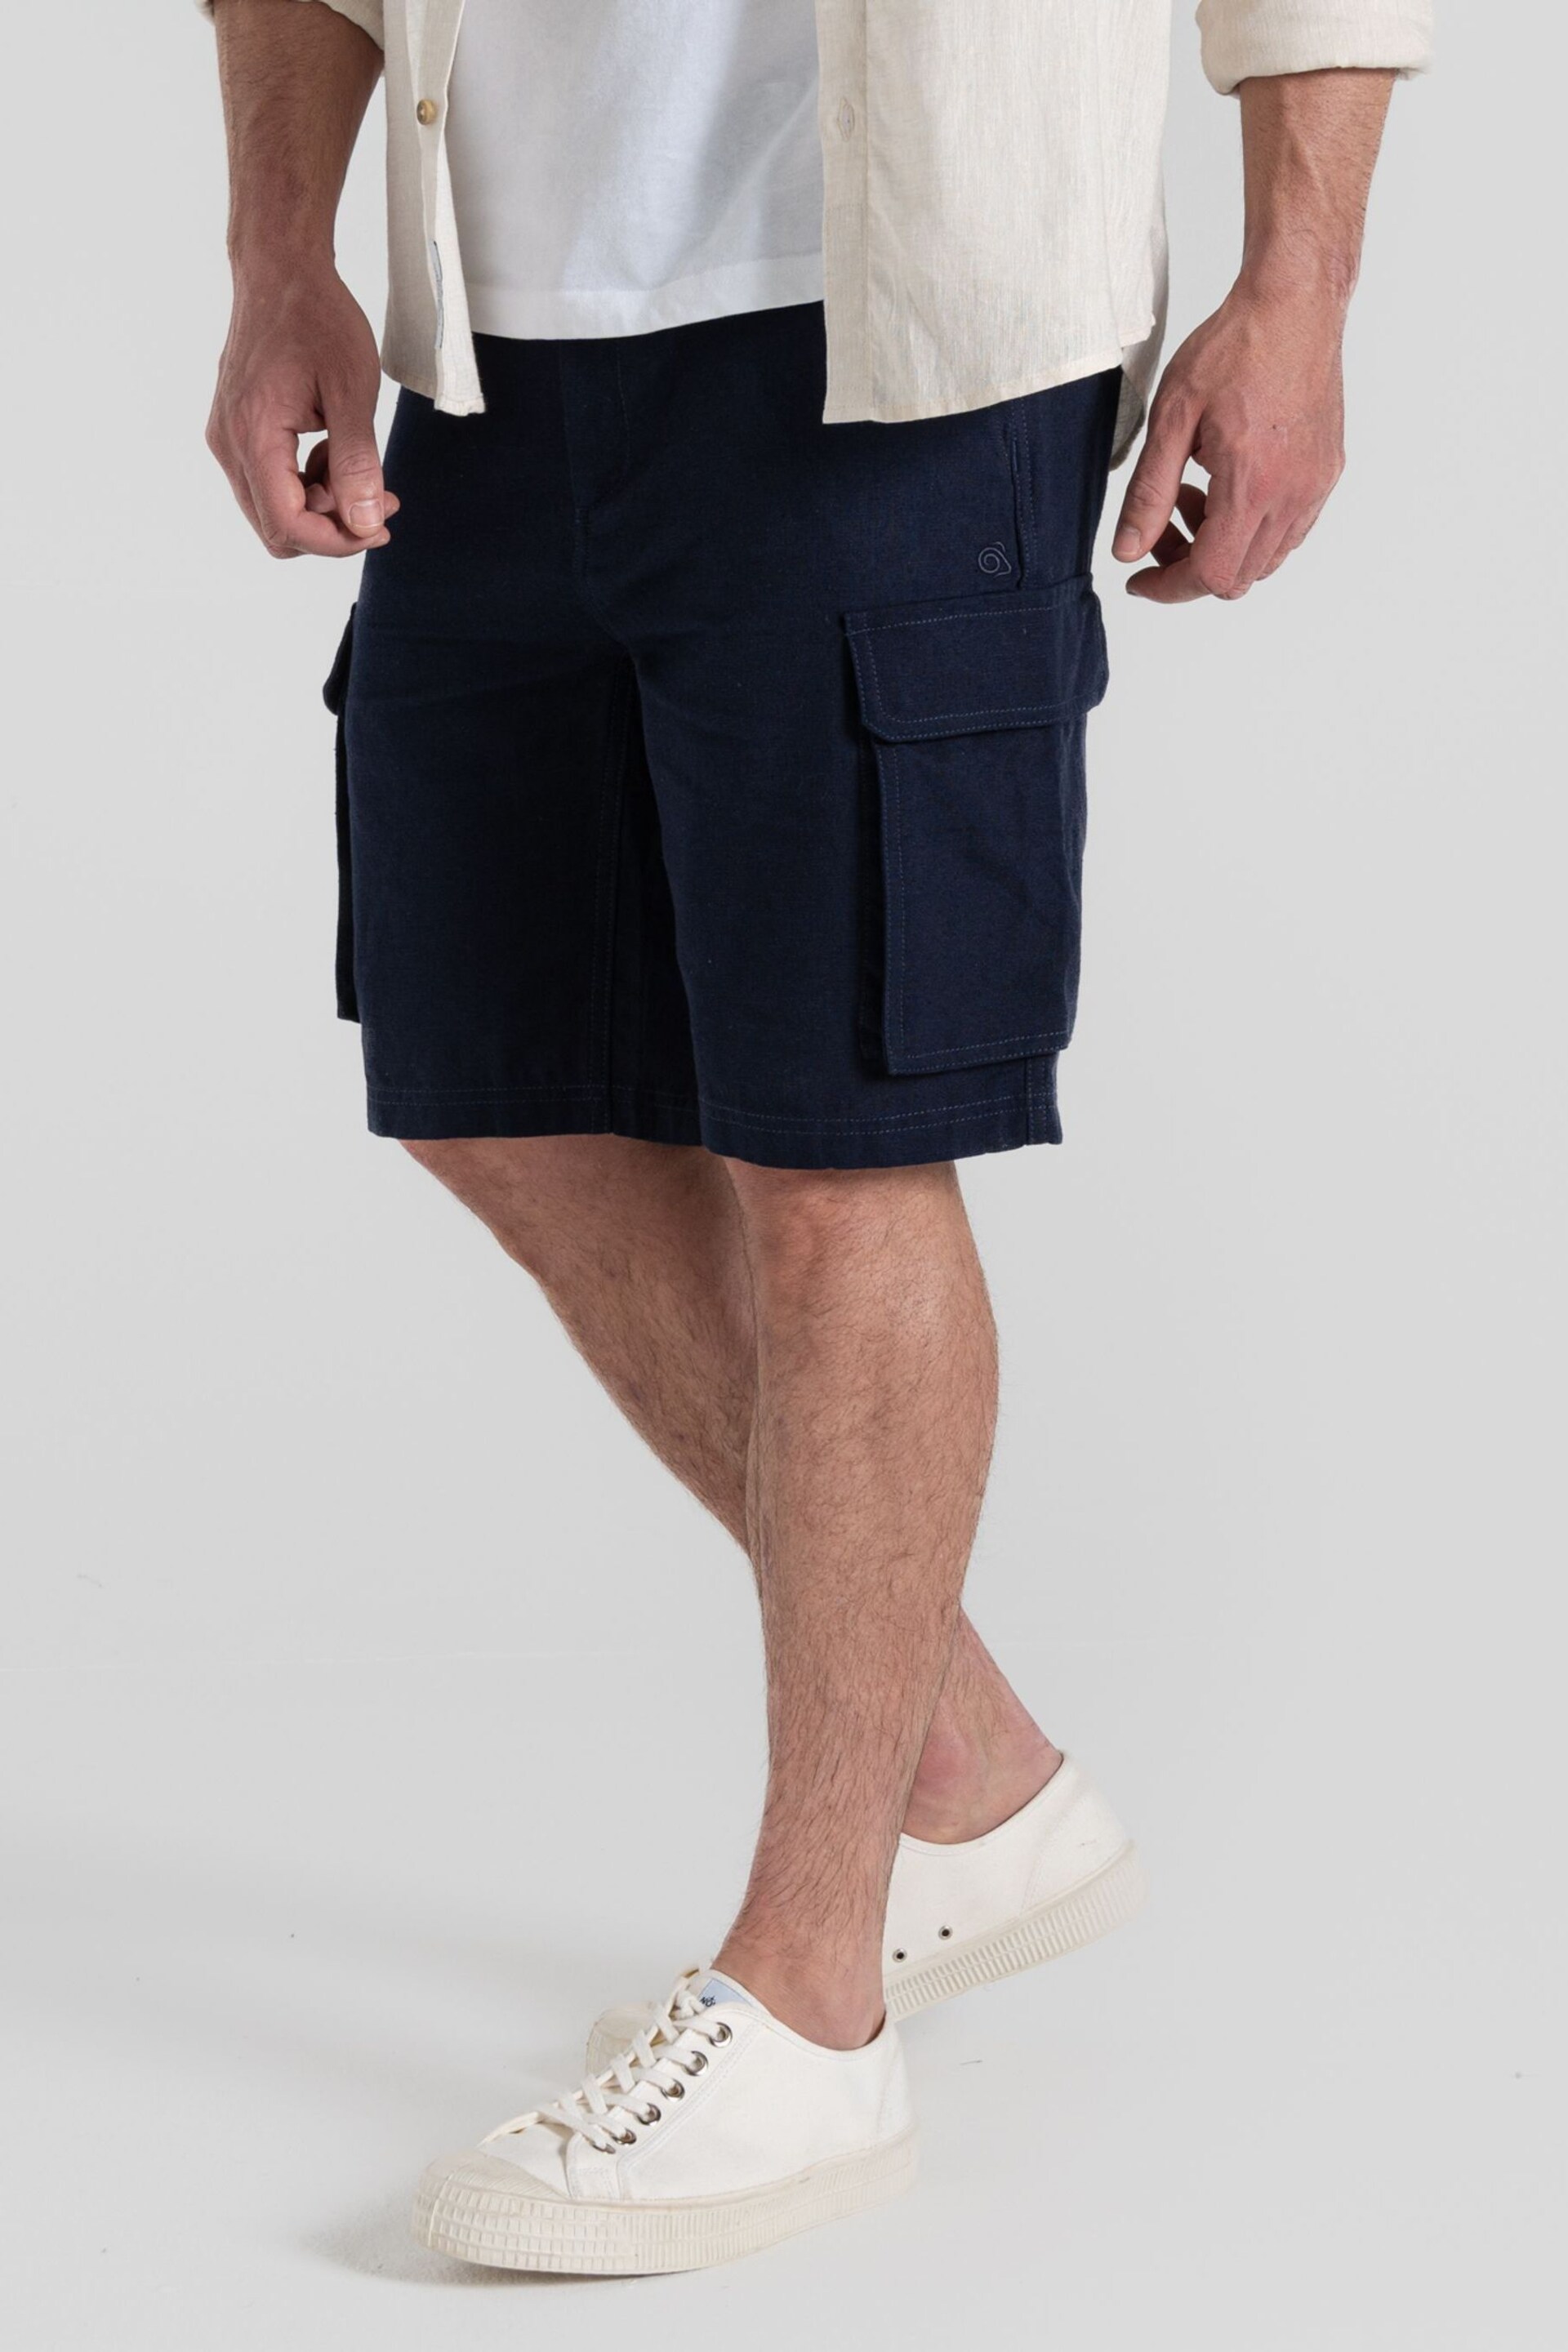 Craghoppers Blue Howle Shorts - Image 4 of 7